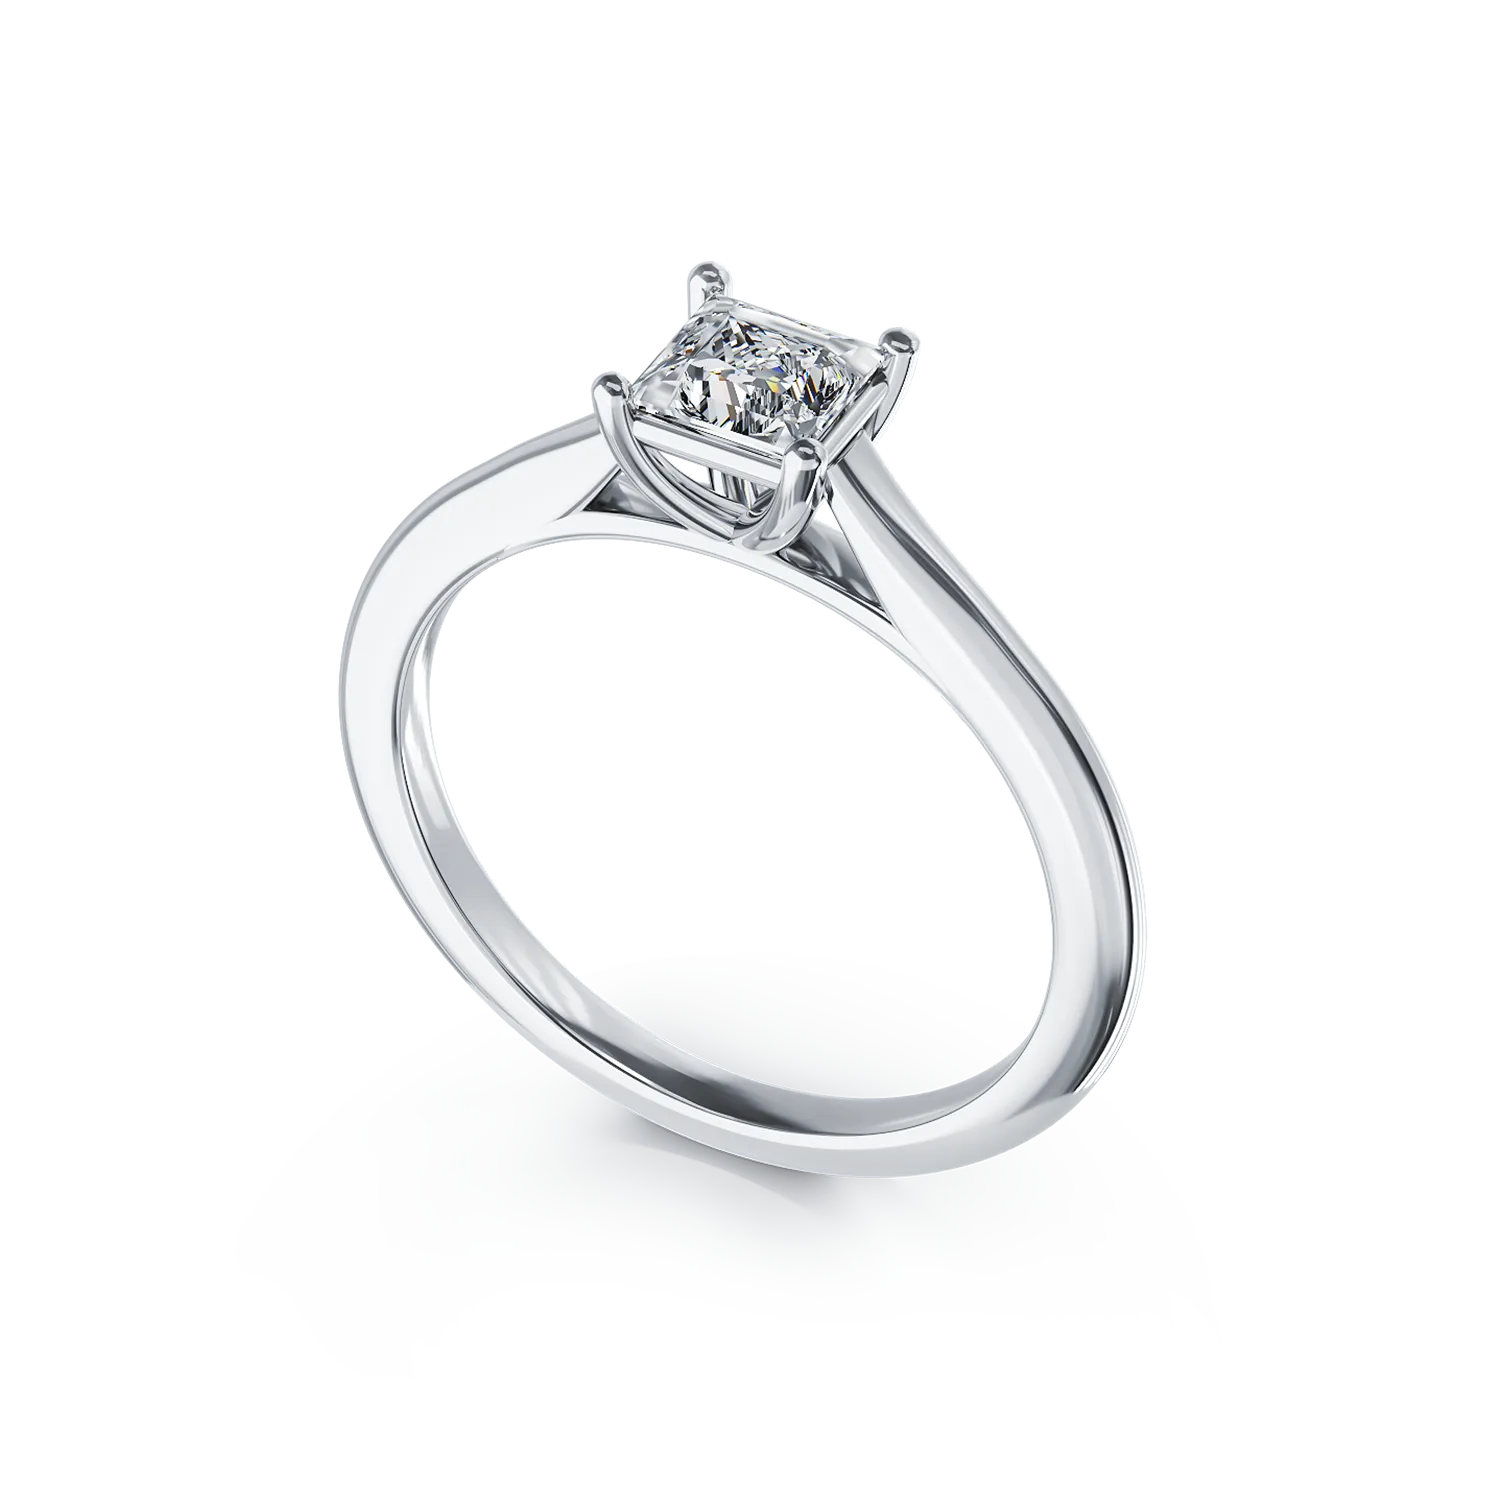 Platinum engagement ring with a 0.52ct solitaire diamond